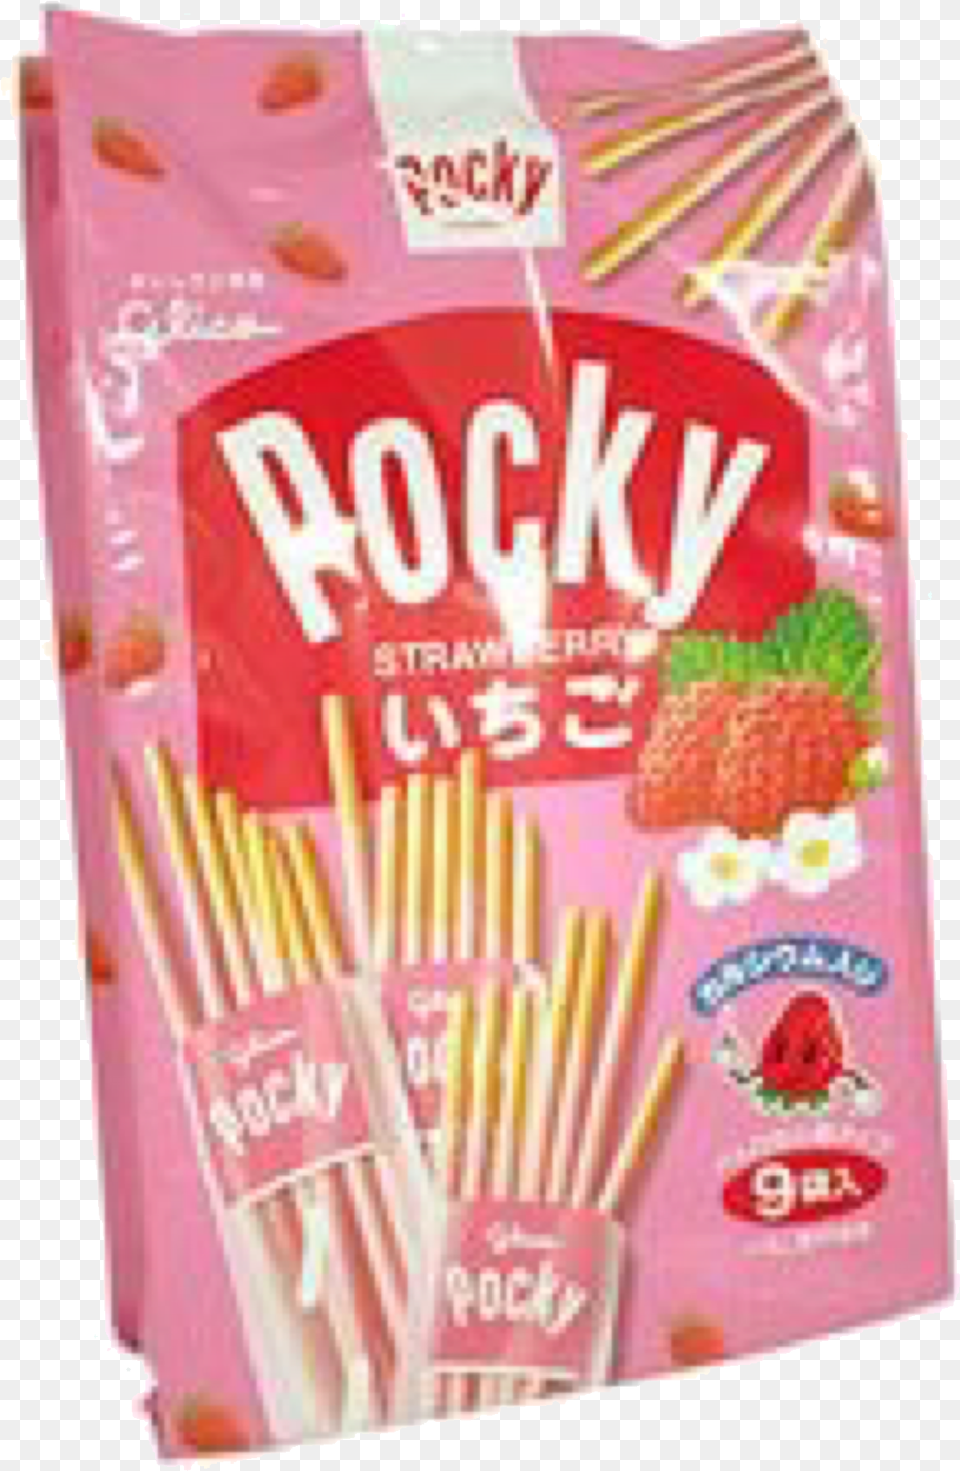 Chocolate Biscuits Chocolate Coating Travel Snacks Strawberry Pocky 9 Bags, Sweets, Food, Candy, Snack Png